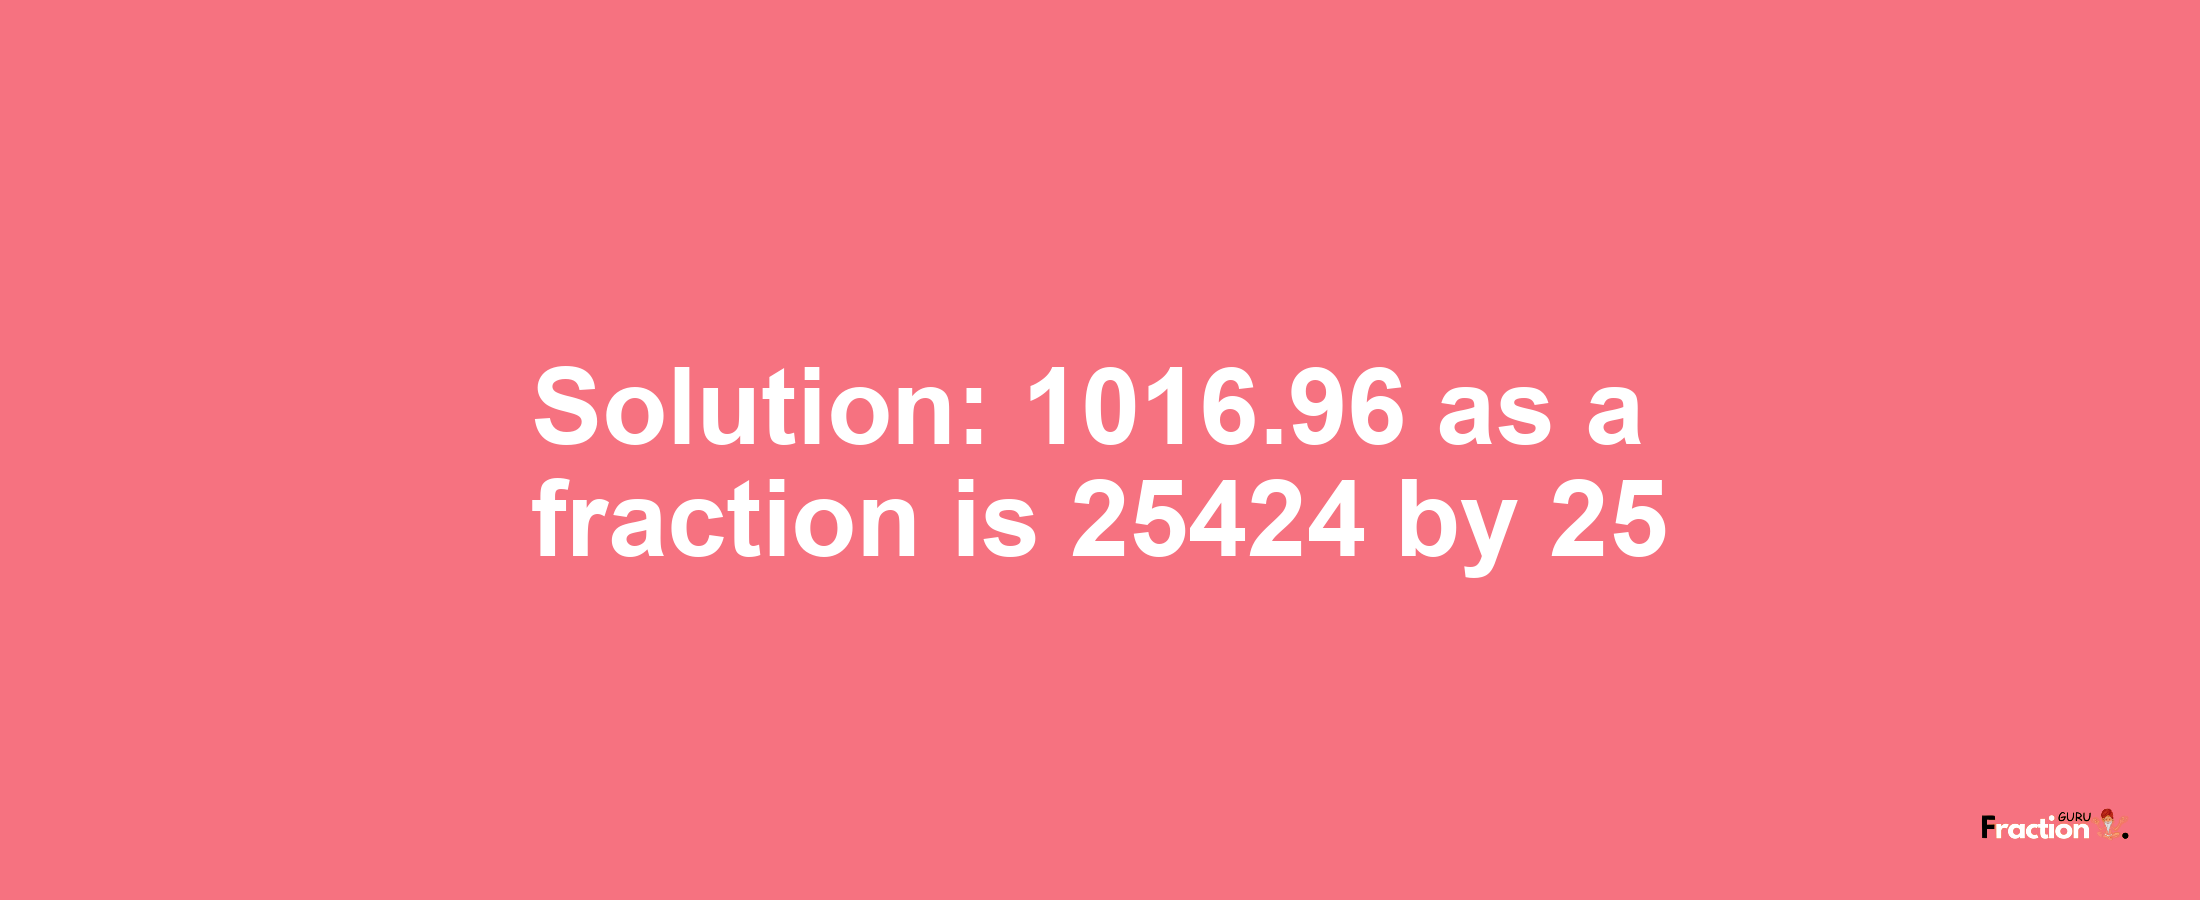 Solution:1016.96 as a fraction is 25424/25